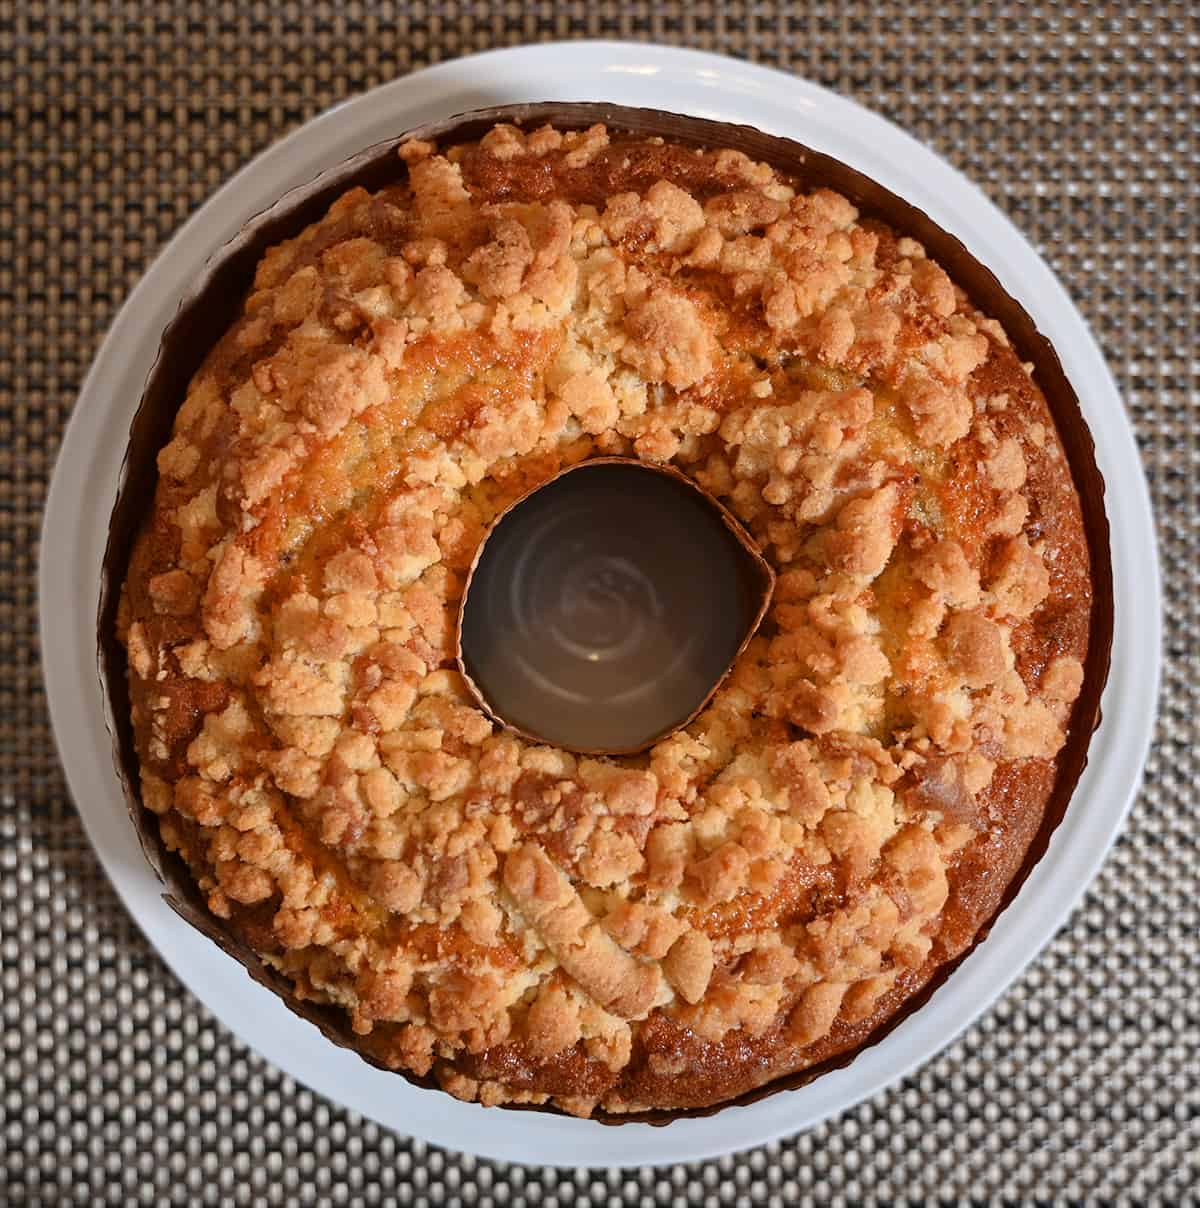 Top down image of the coffee cake showing the streusel on top.